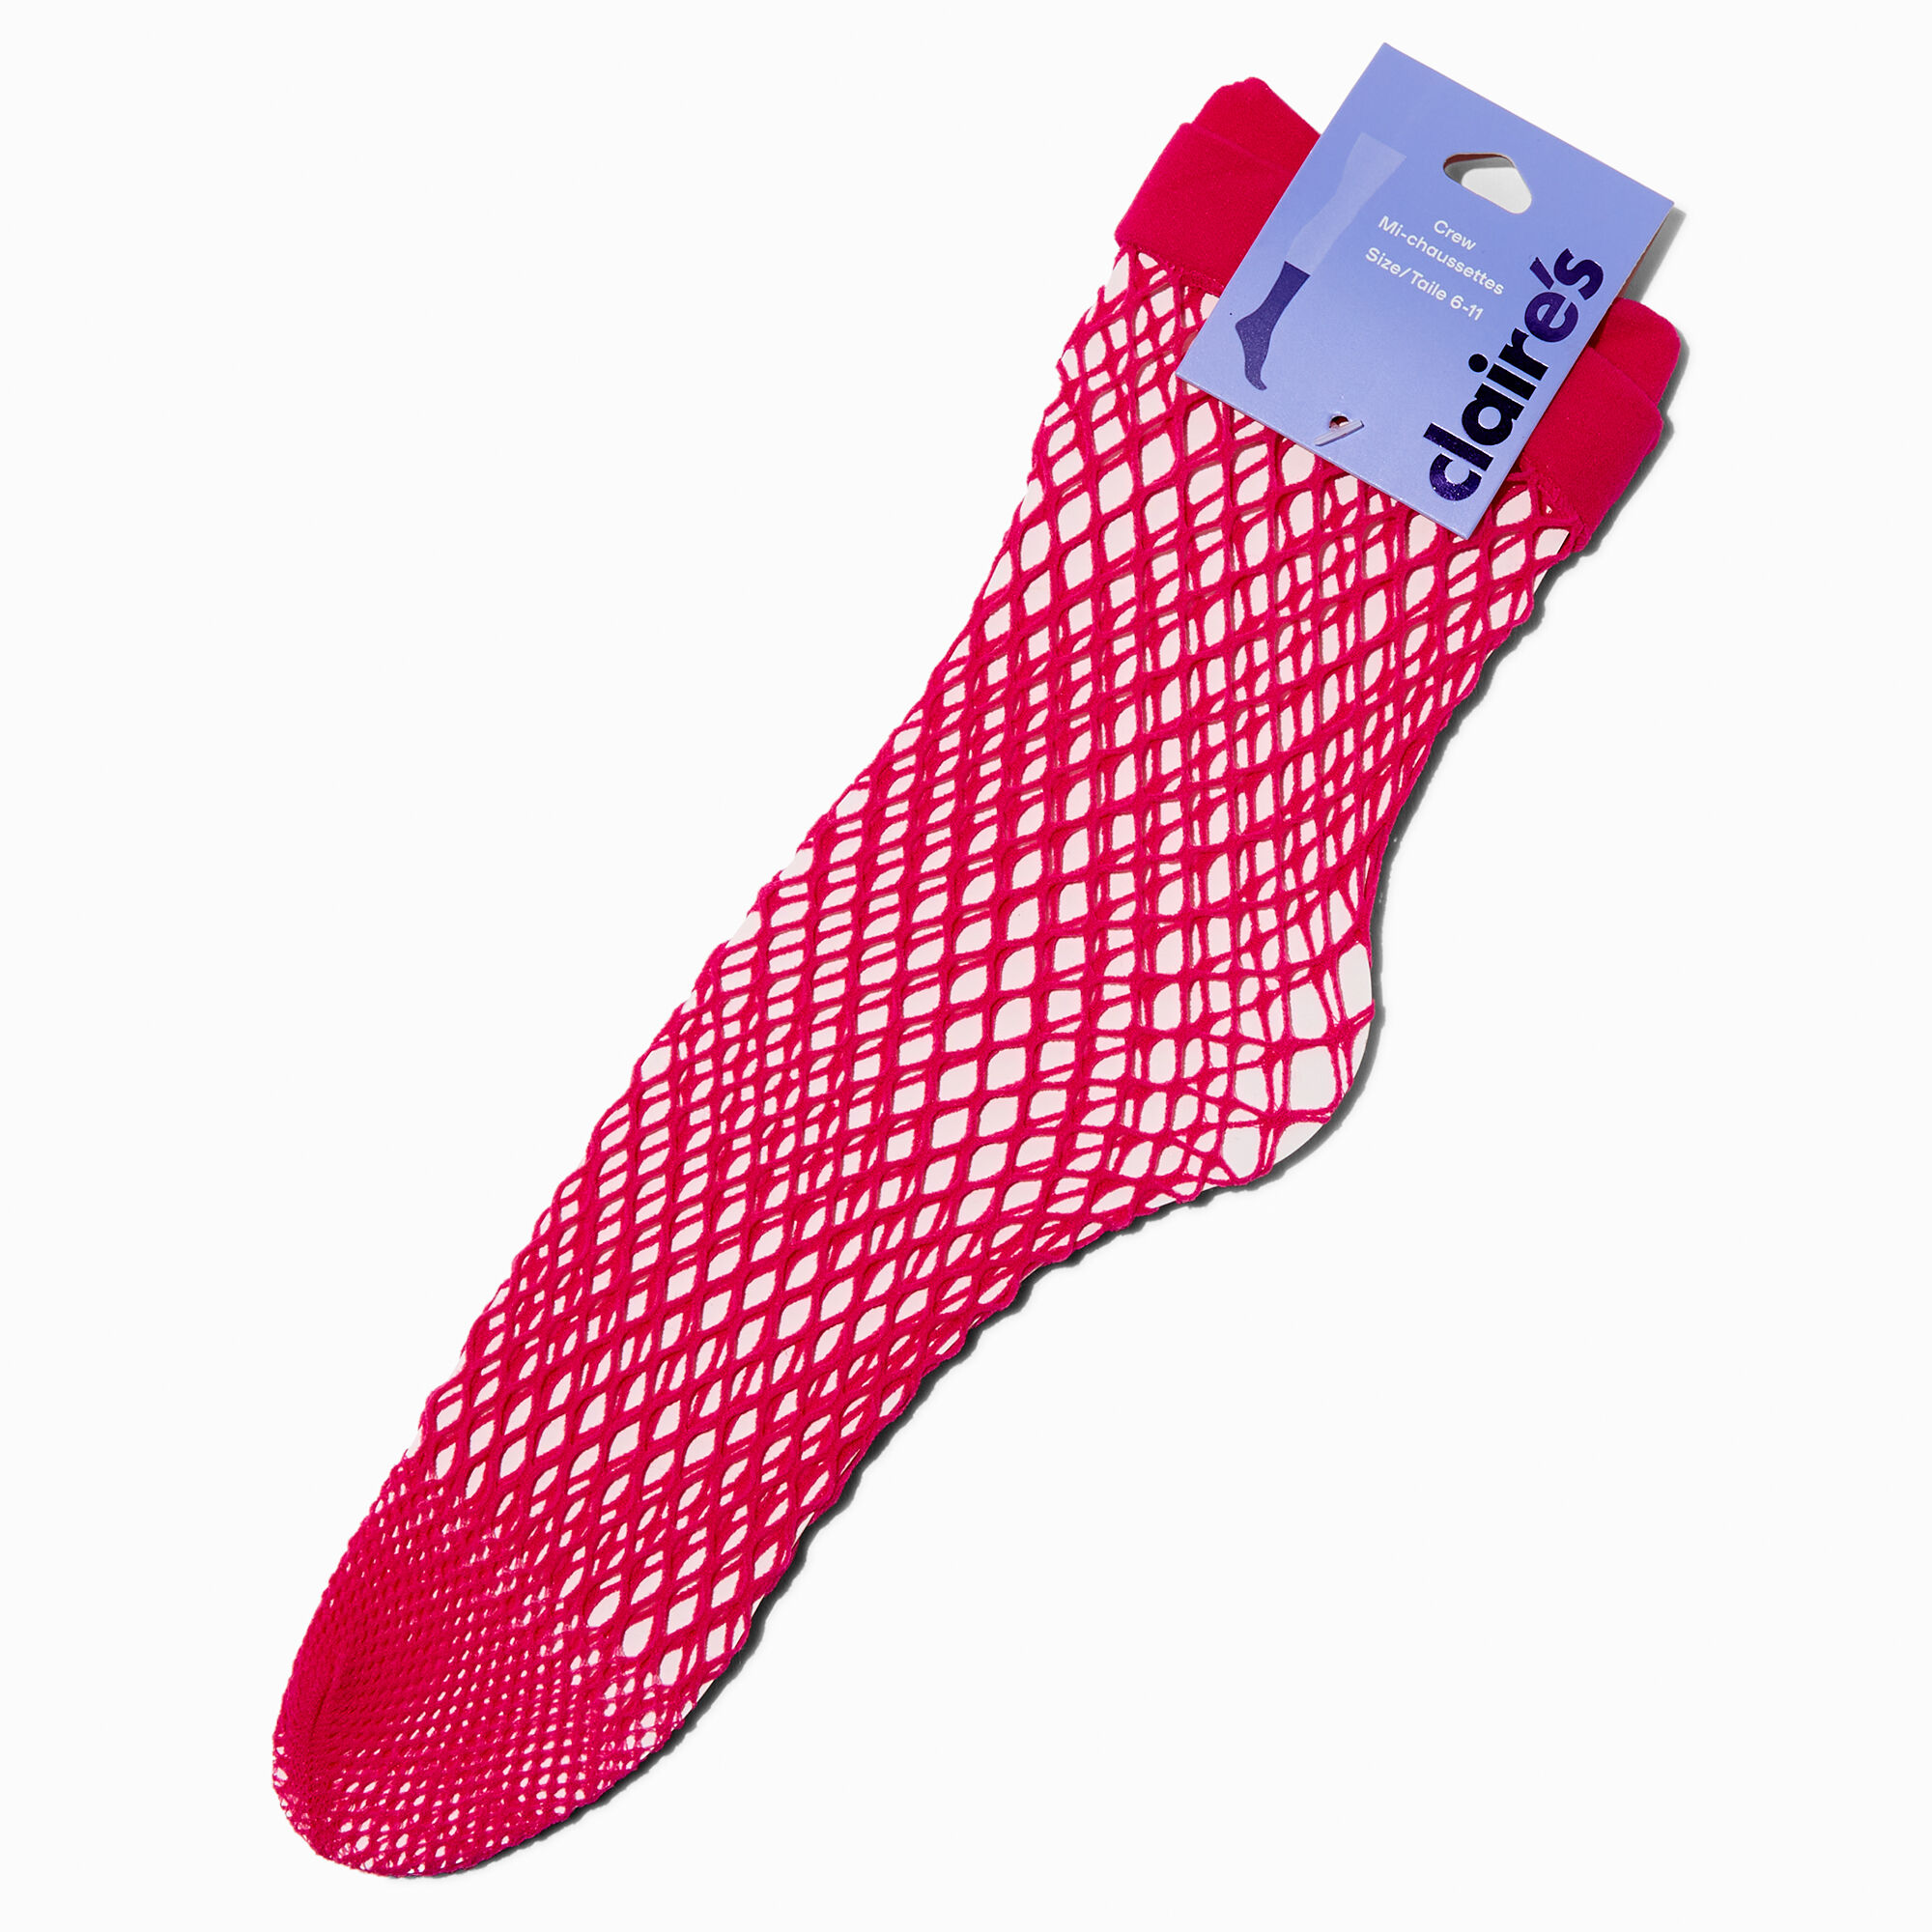 View Claires Bright Fishnet Crew Socks Pink information